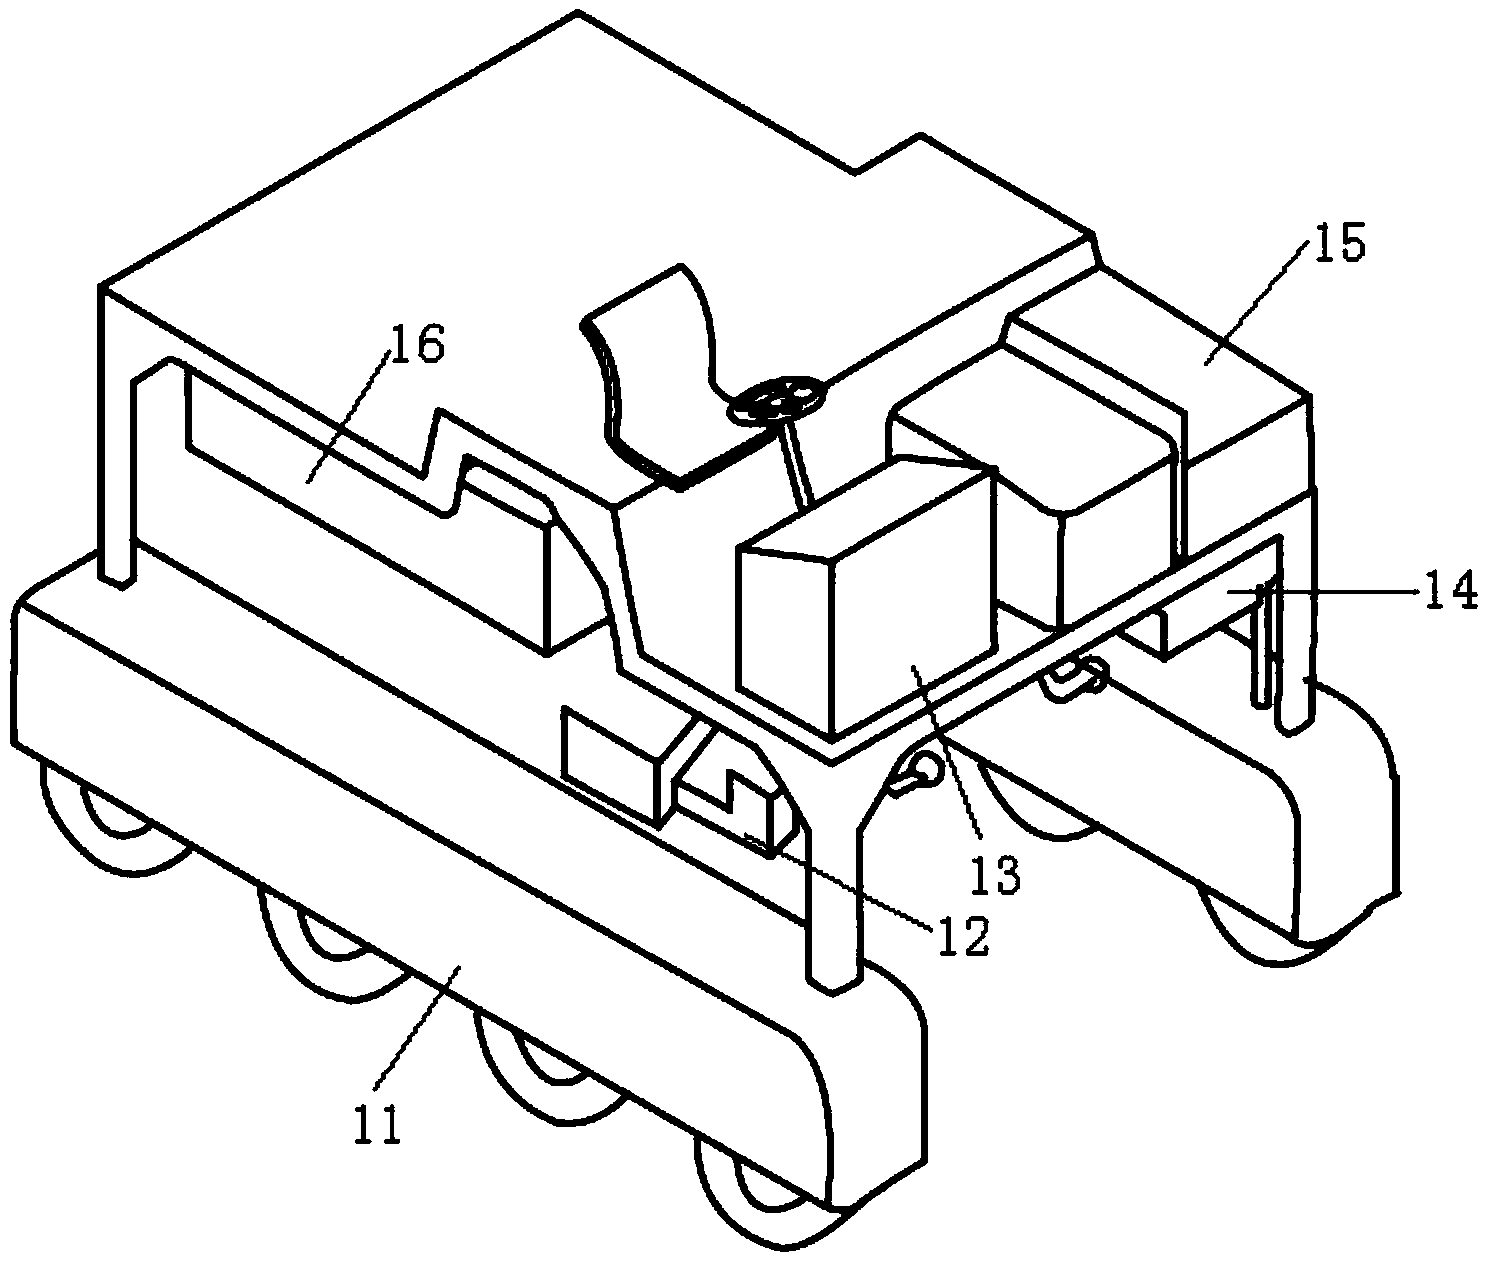 Intelligent automatic cutting type tea-leaf picker based on machine vision and working method